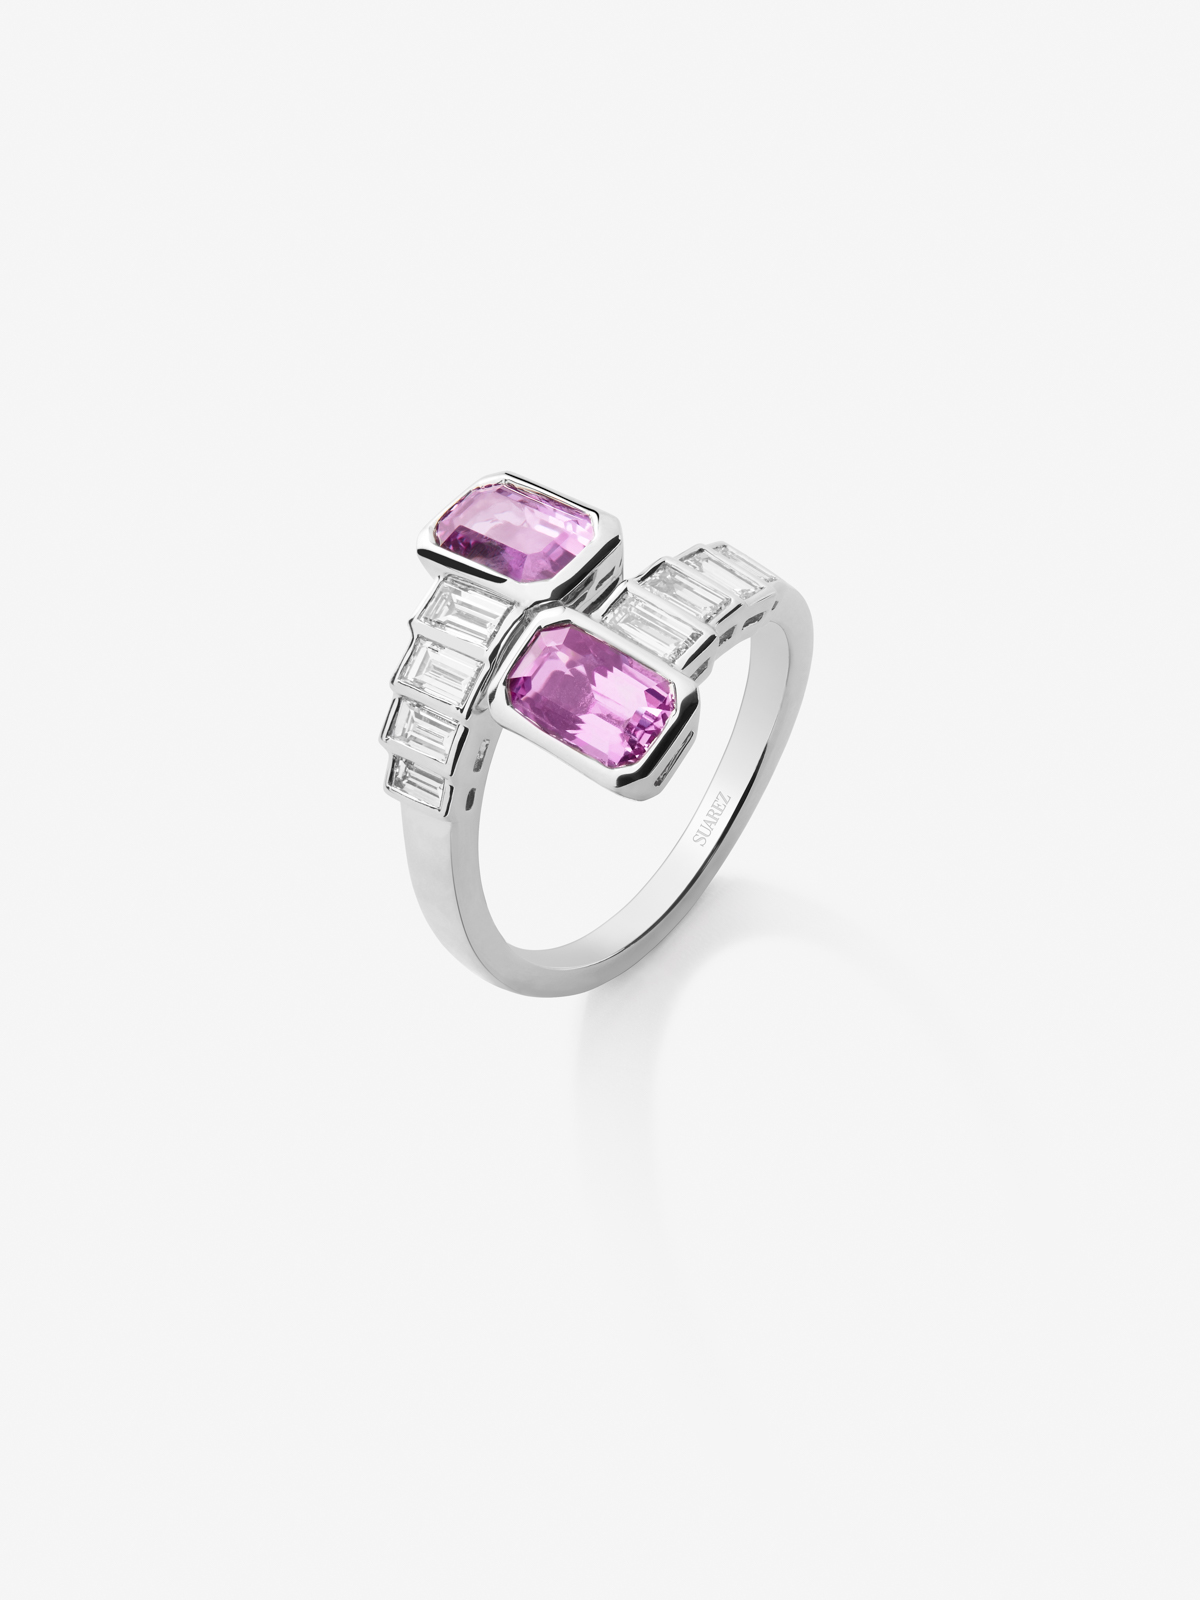 You and I 18k White Gold Ring with pink sapphires